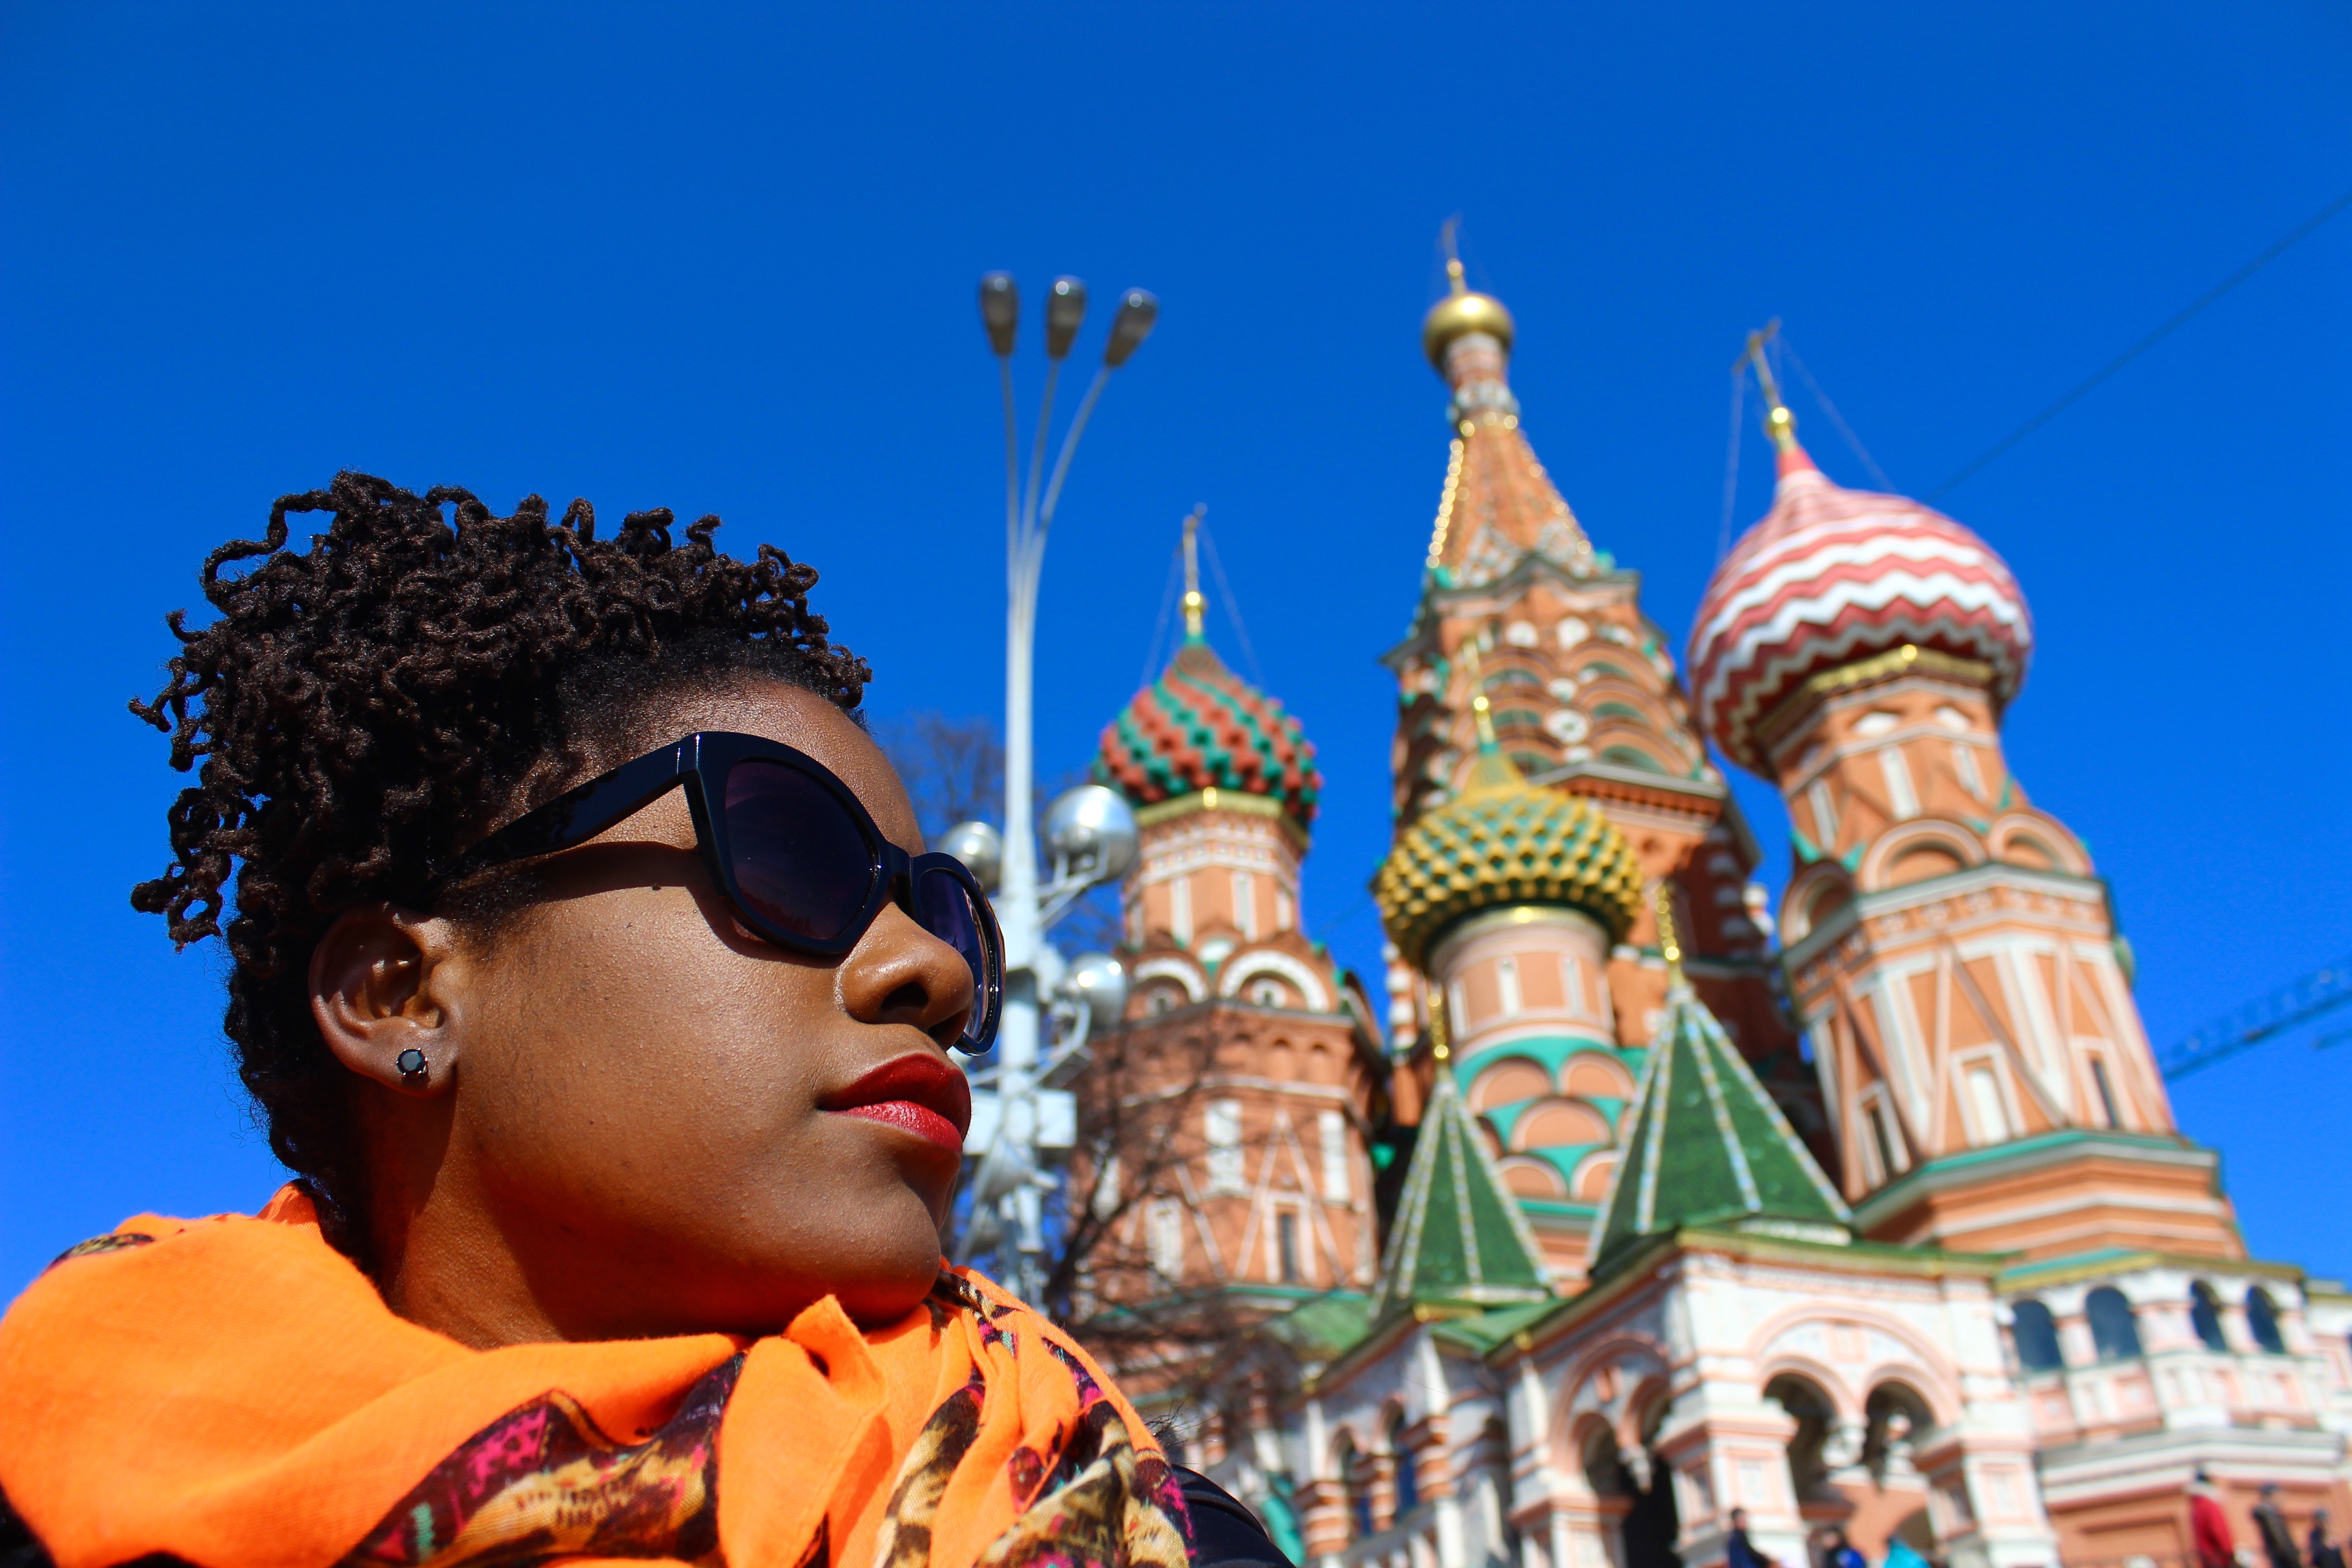 Are Russians racist towards black people? My experience